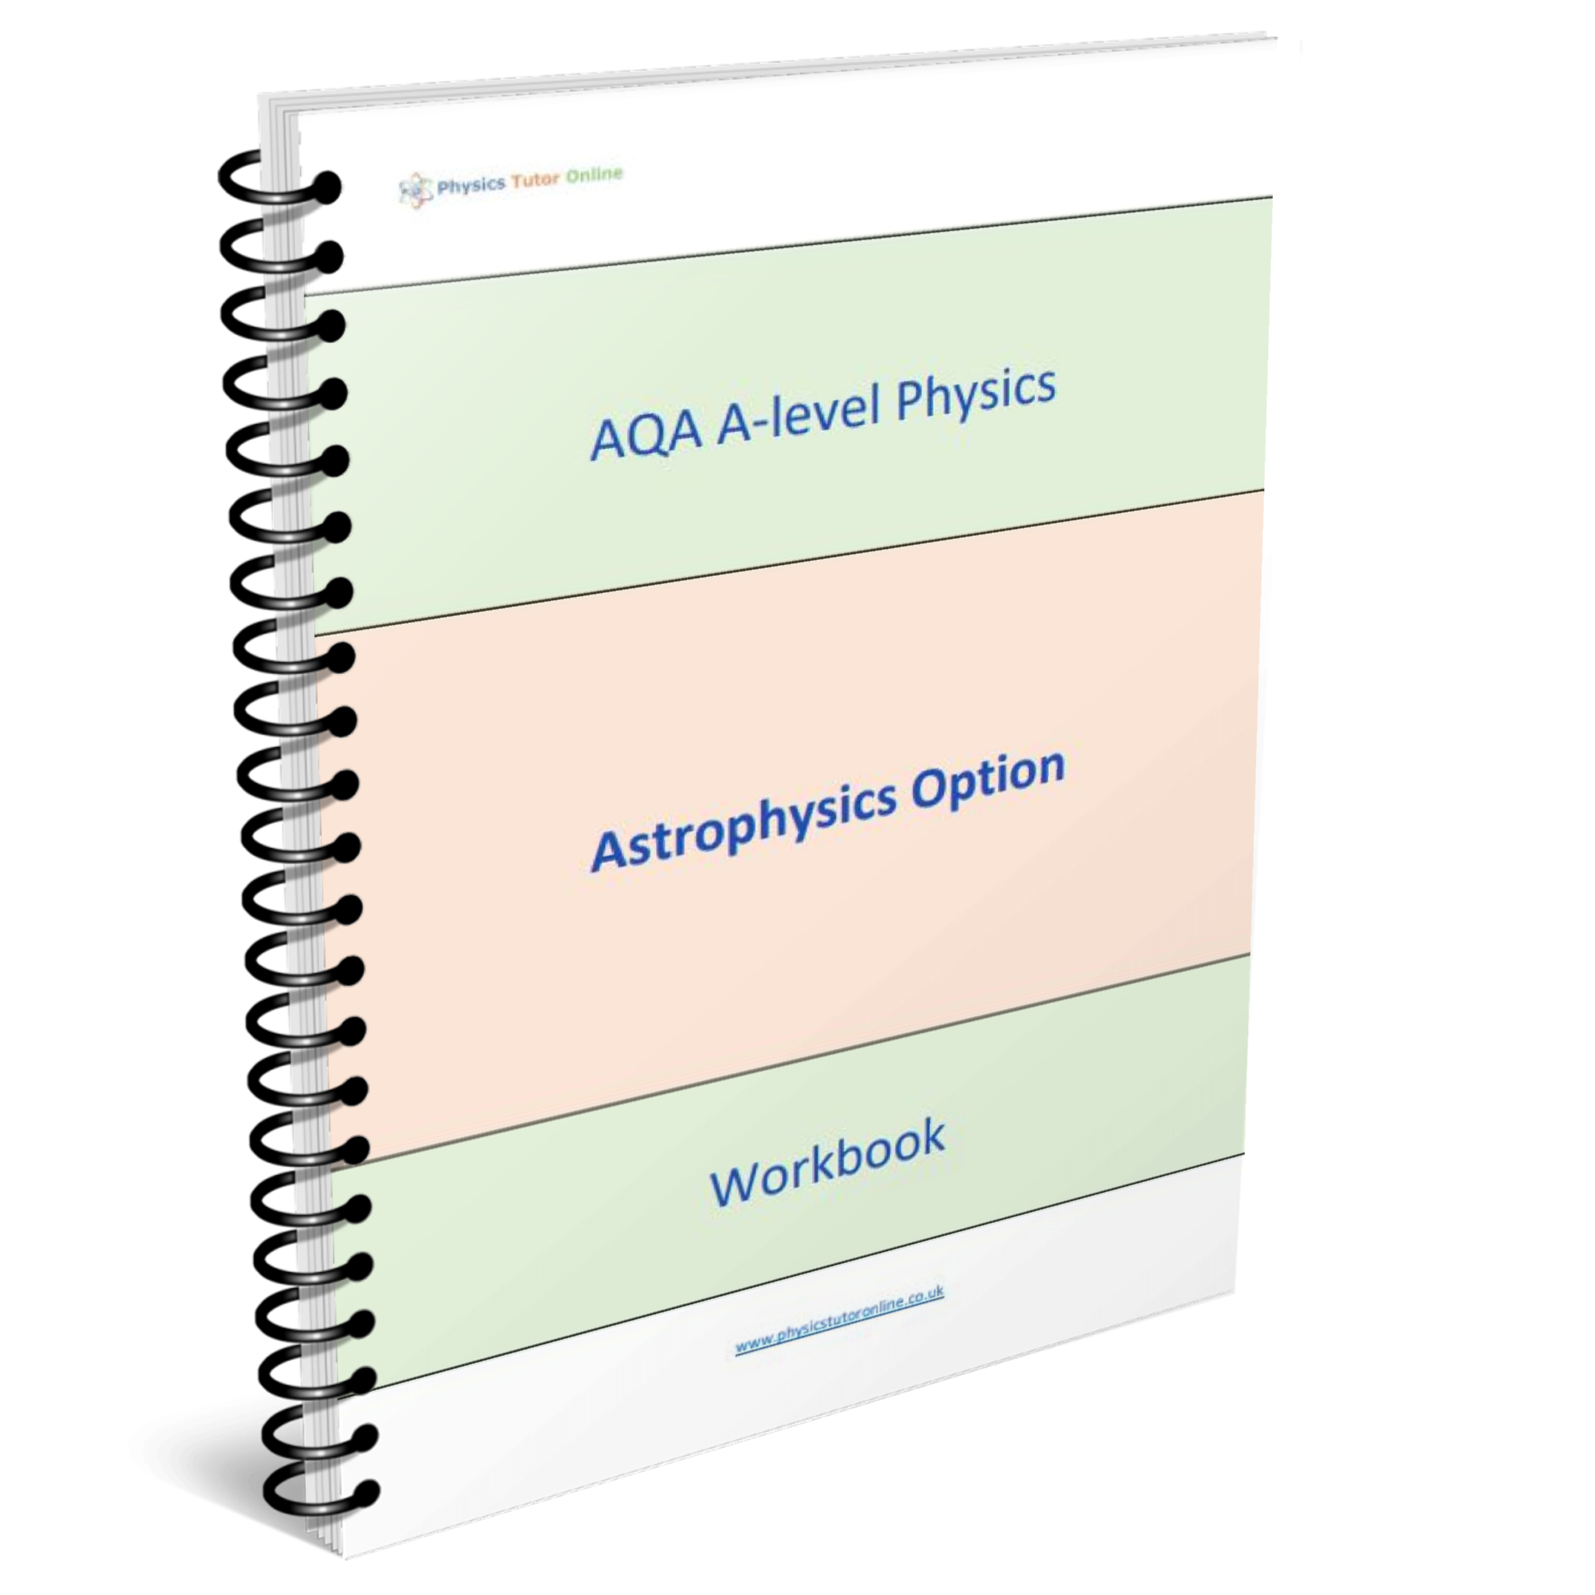 AQA A level Physics – why have AQA removed all old spec past papers? - Physics Tutor Online